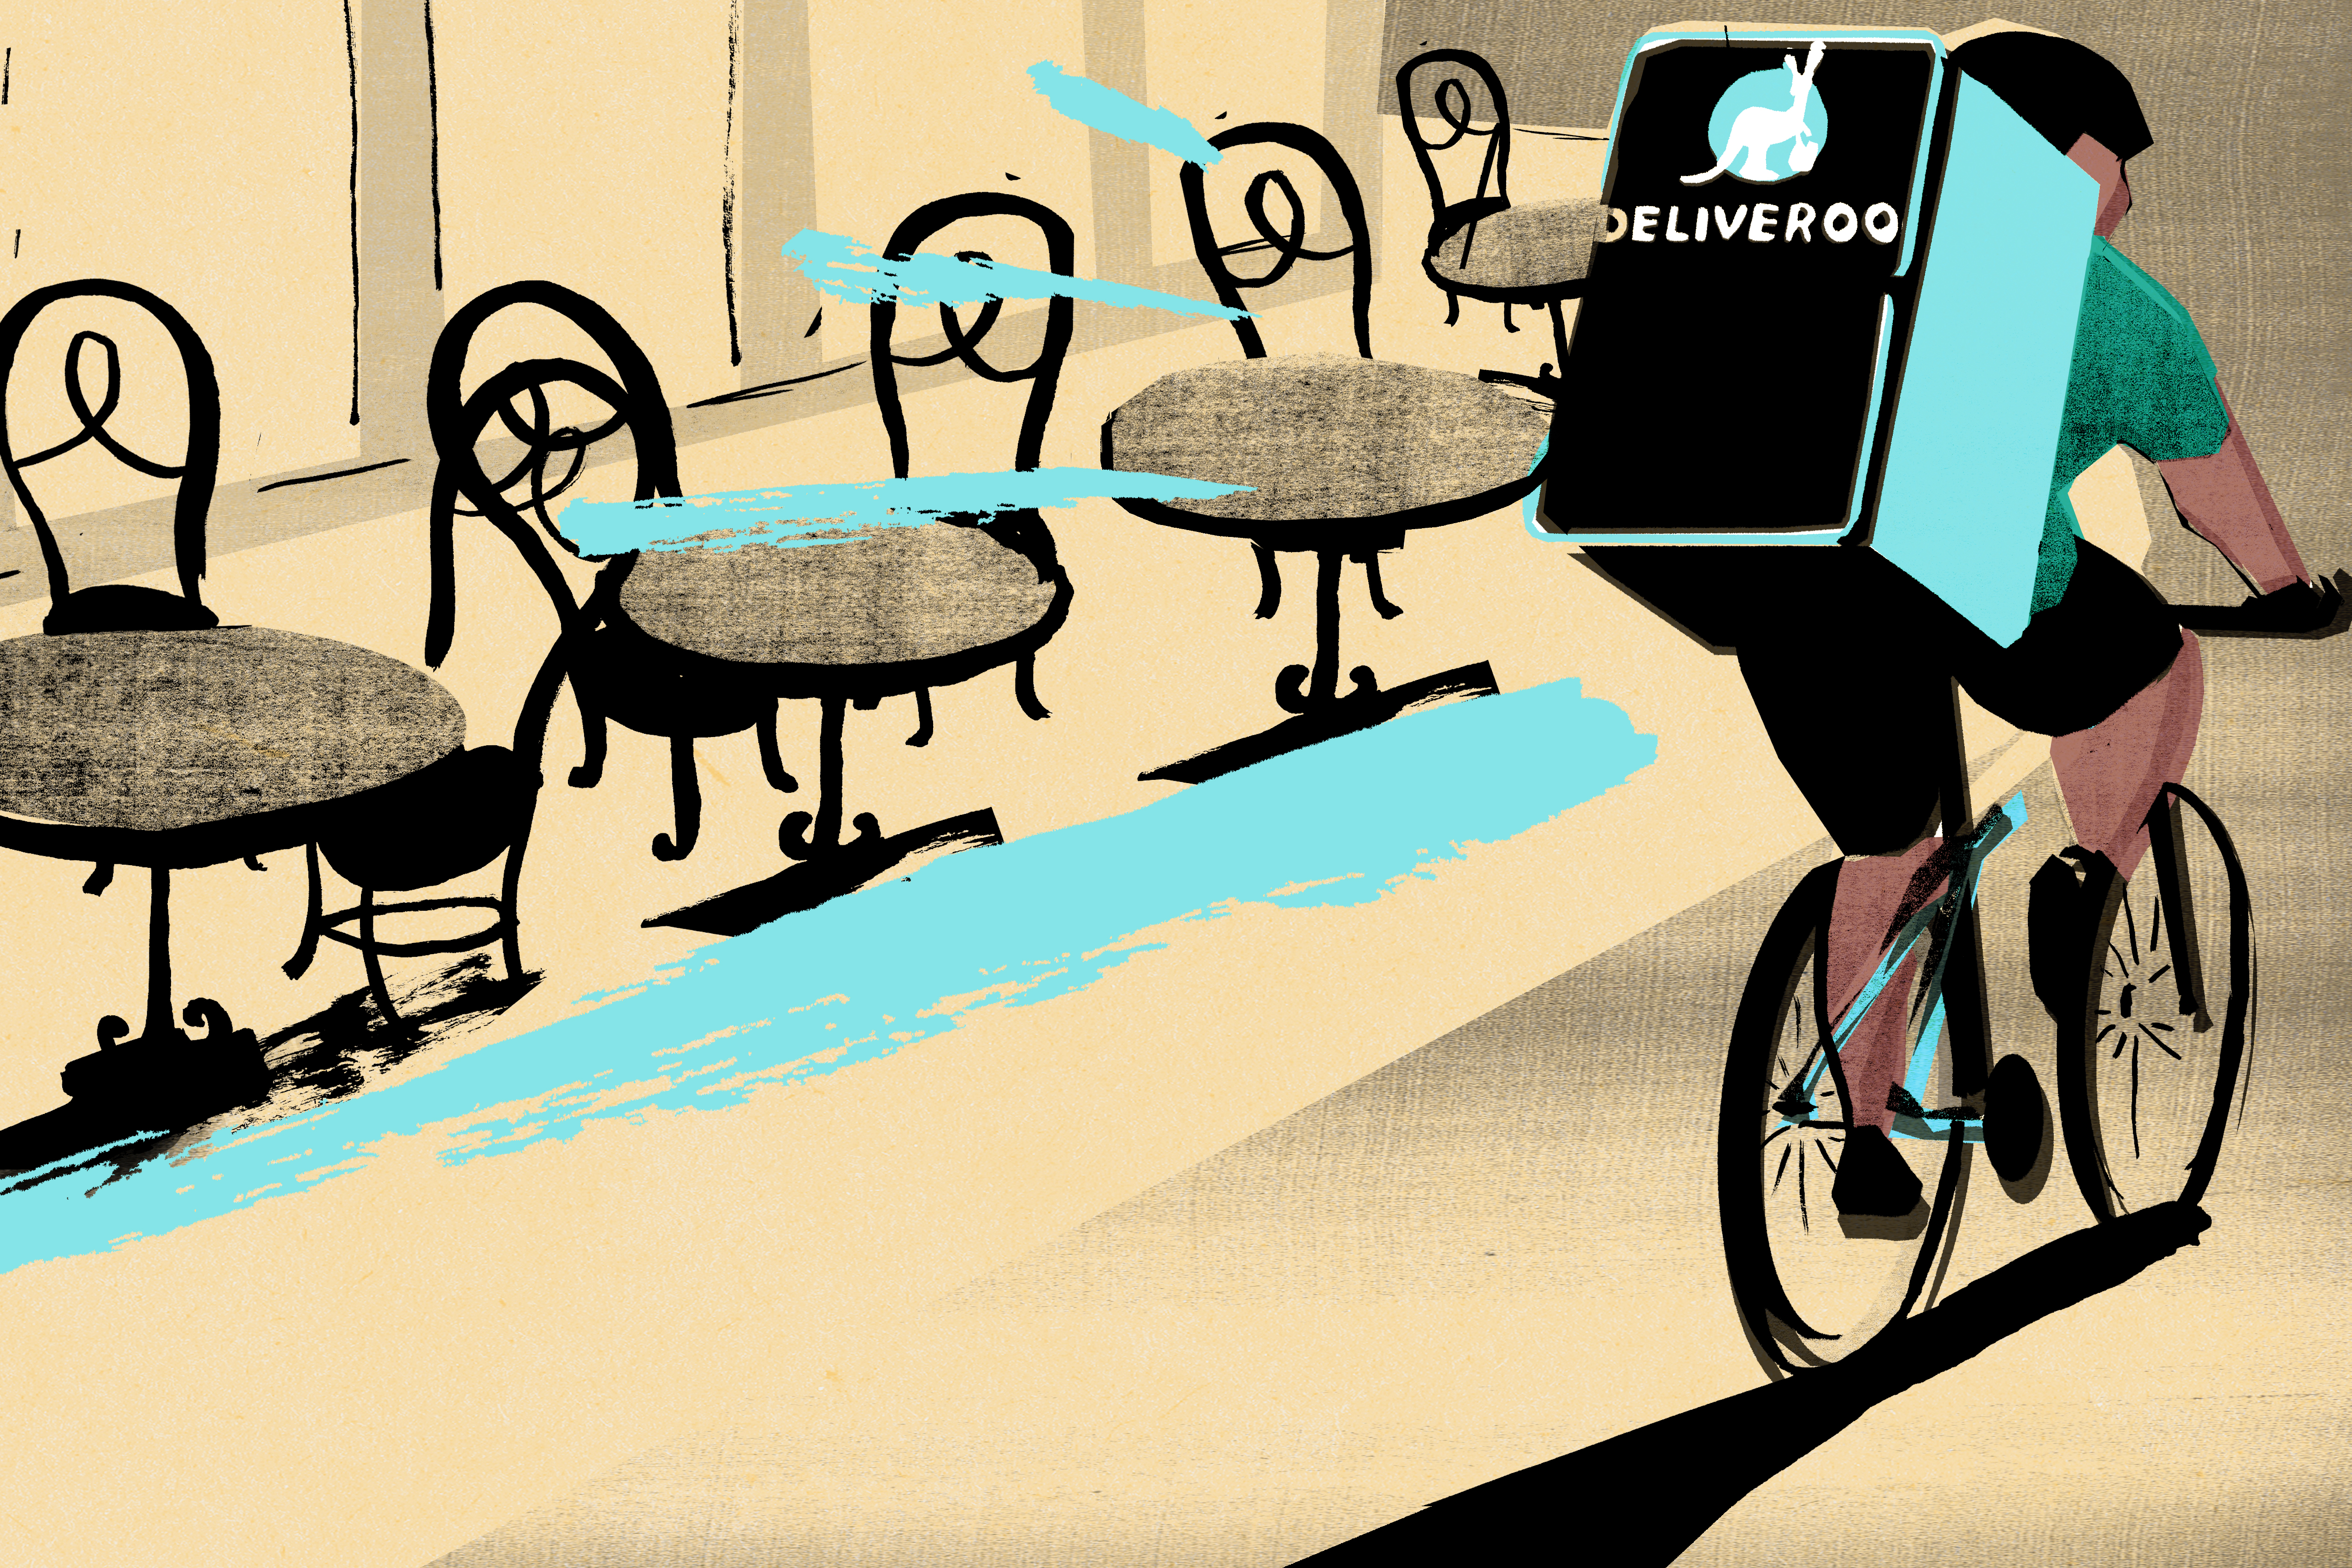 Food delivery platform Deliveroo has encouraged the UK government to reconsider restaurant business rates